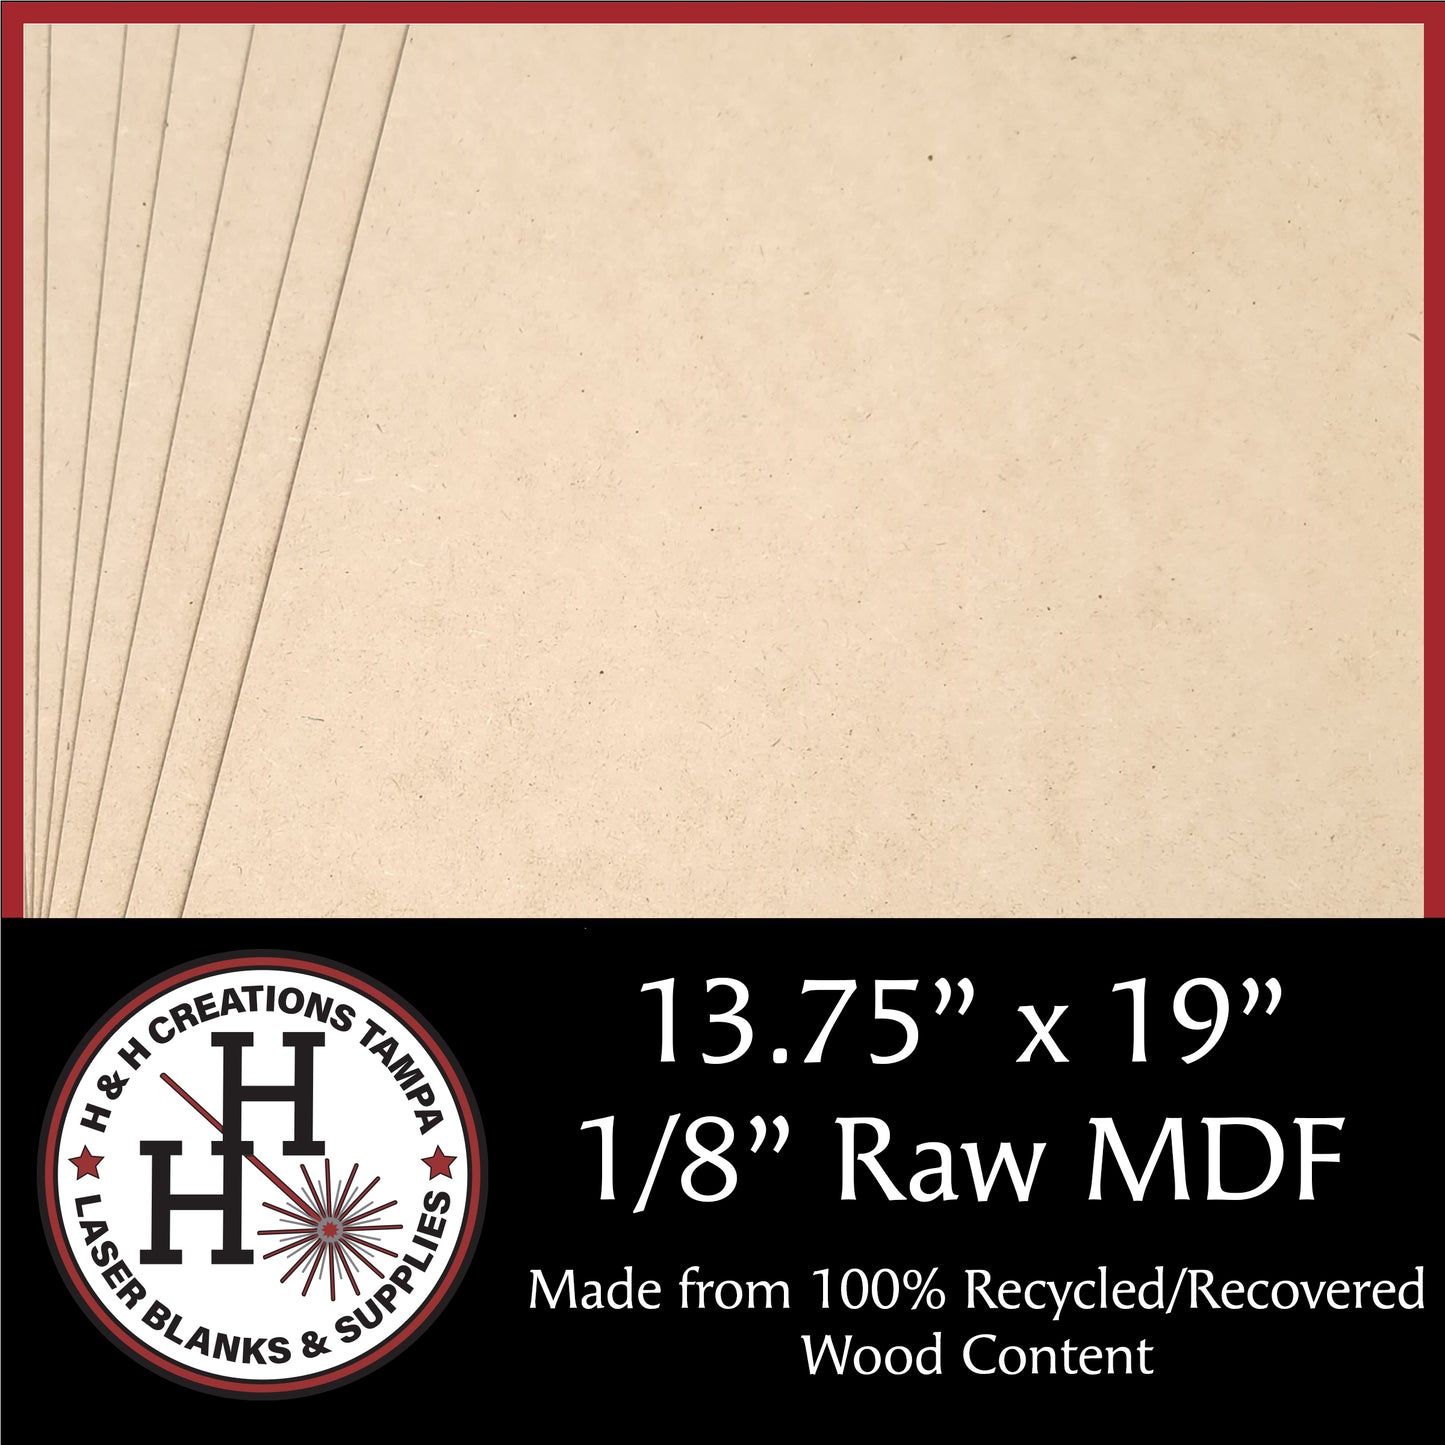 LOCAL PICK UP ONLY - 1/8" Raw Premium MDF Draft Board - Without Slick Finish – 13.75" x 19"